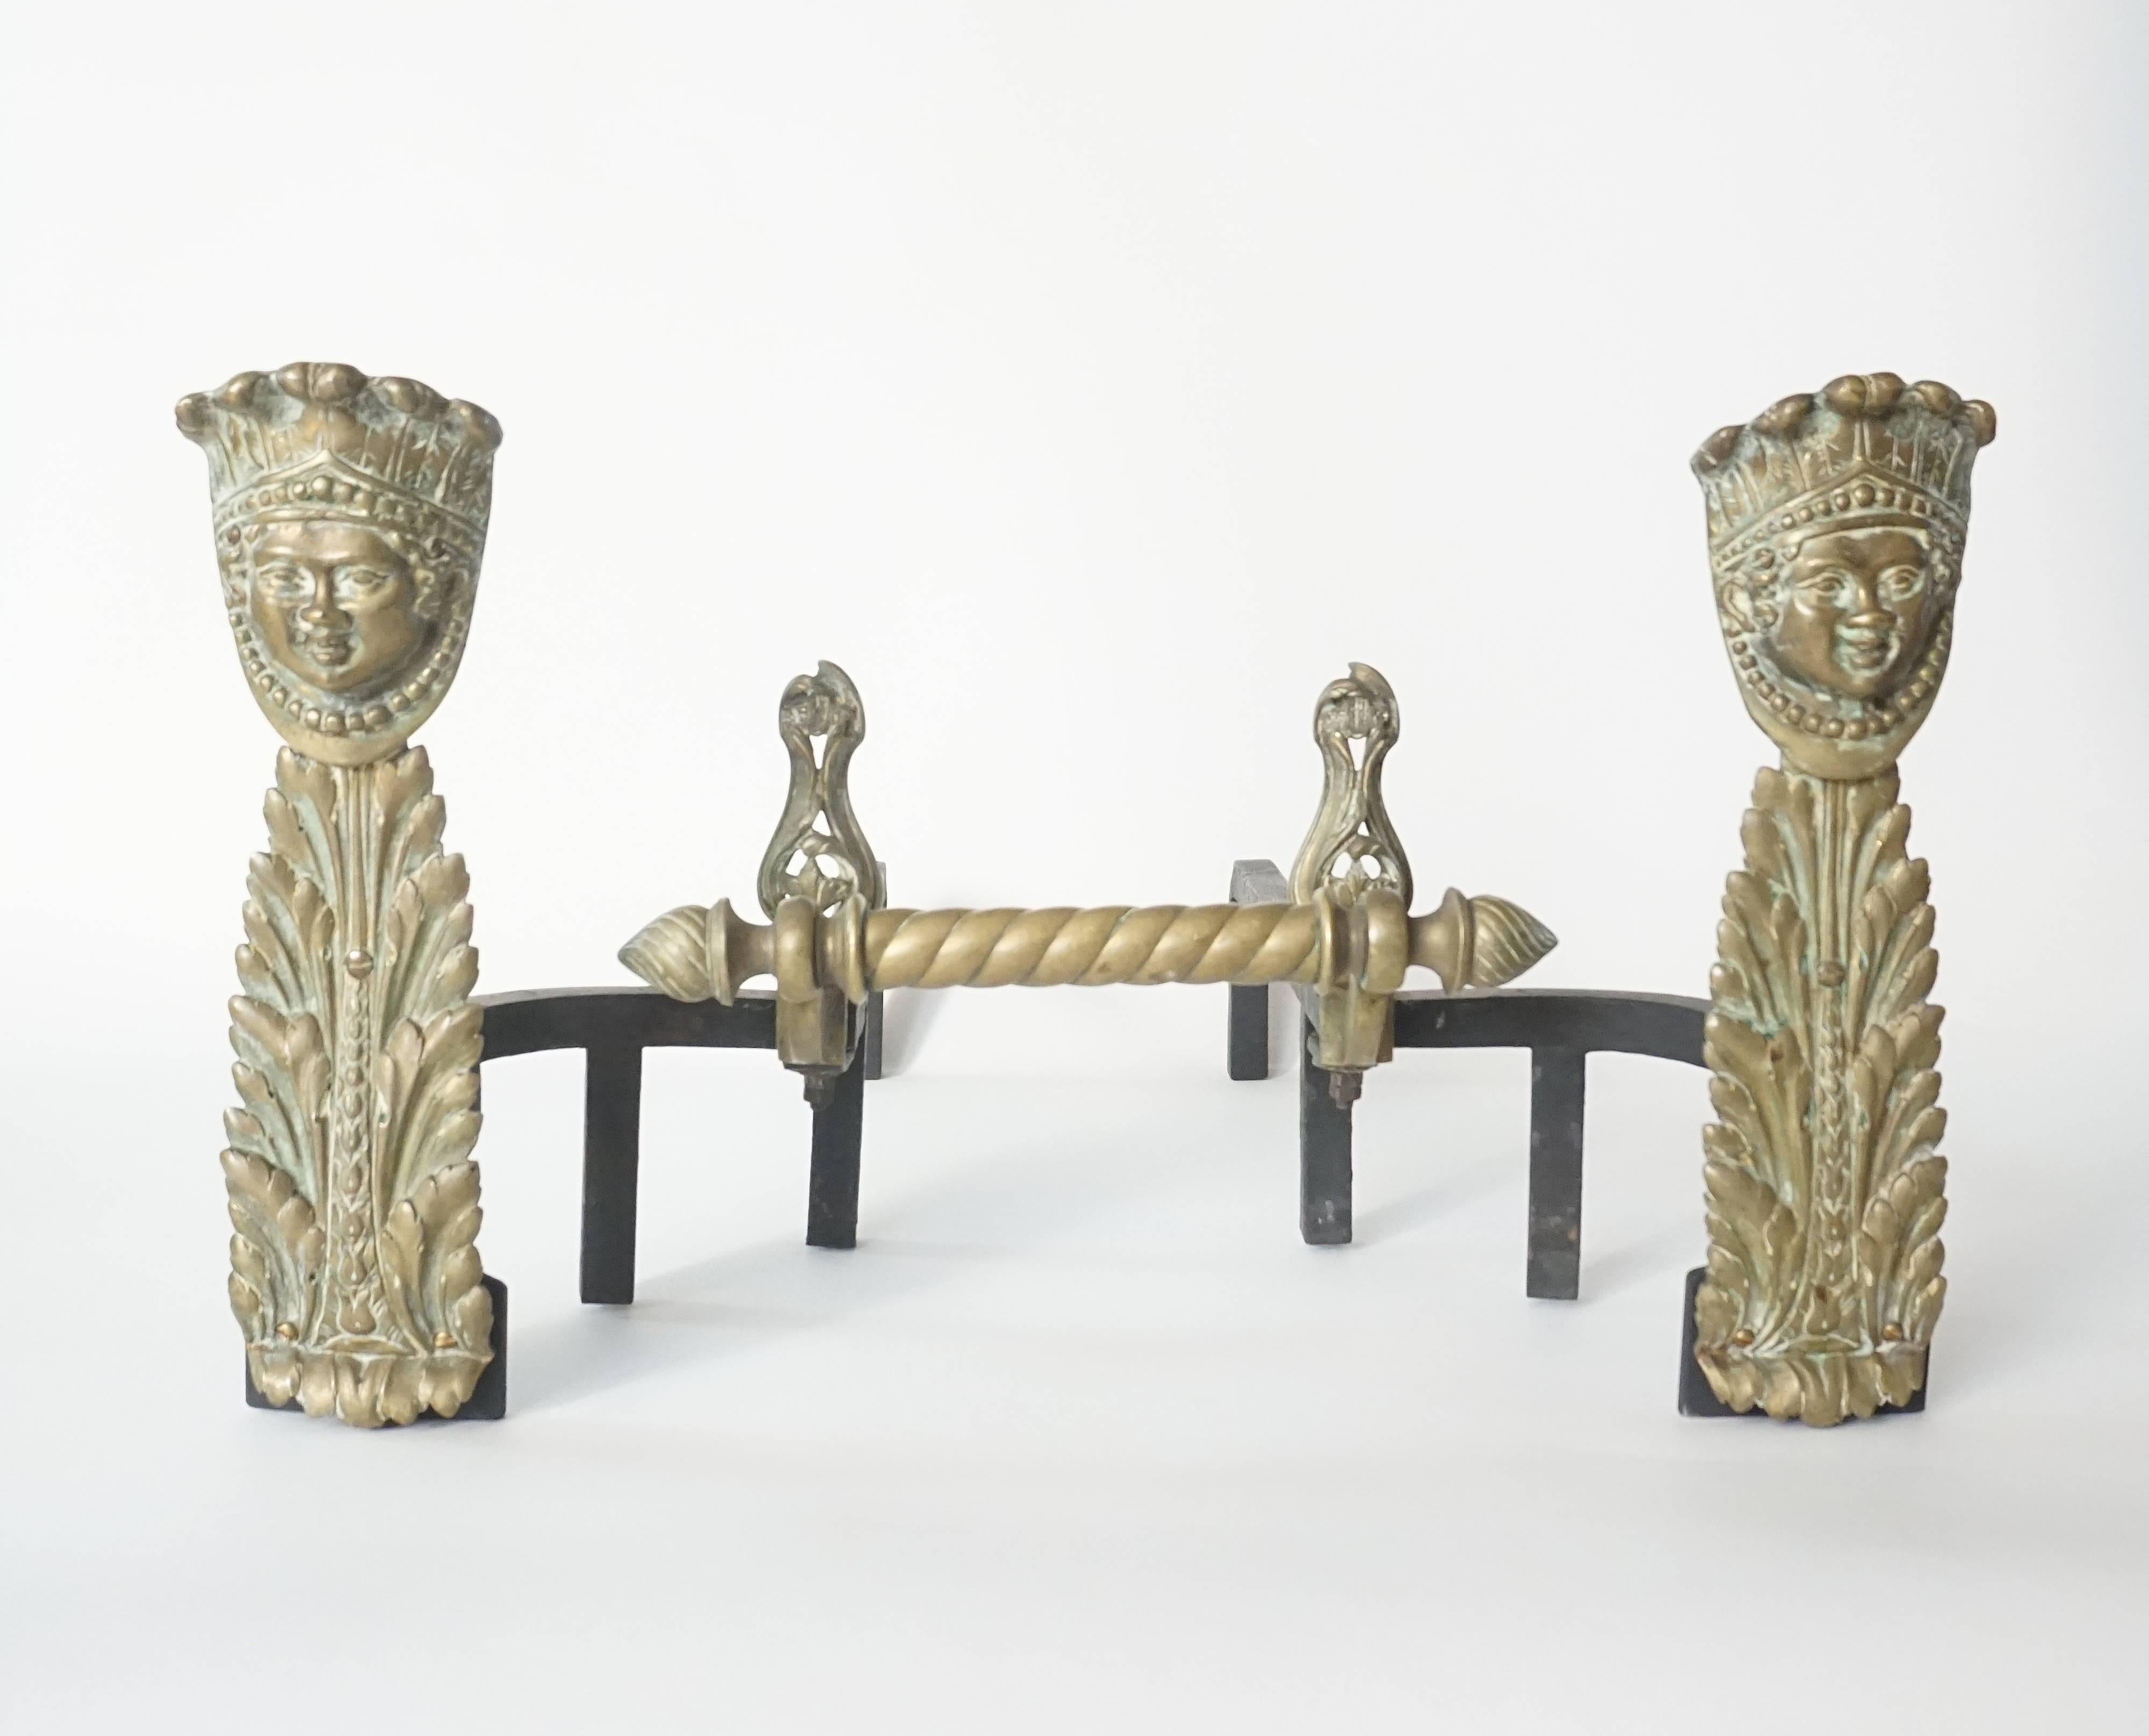 Unusual pair of French Napoleon III period firebox andirons having cast bronze 'Indian Head in Feather Headdress' form finials on foliate acanthus chenet front standards connecting iron log holders joined by bronze spiral bar with spiral end finials